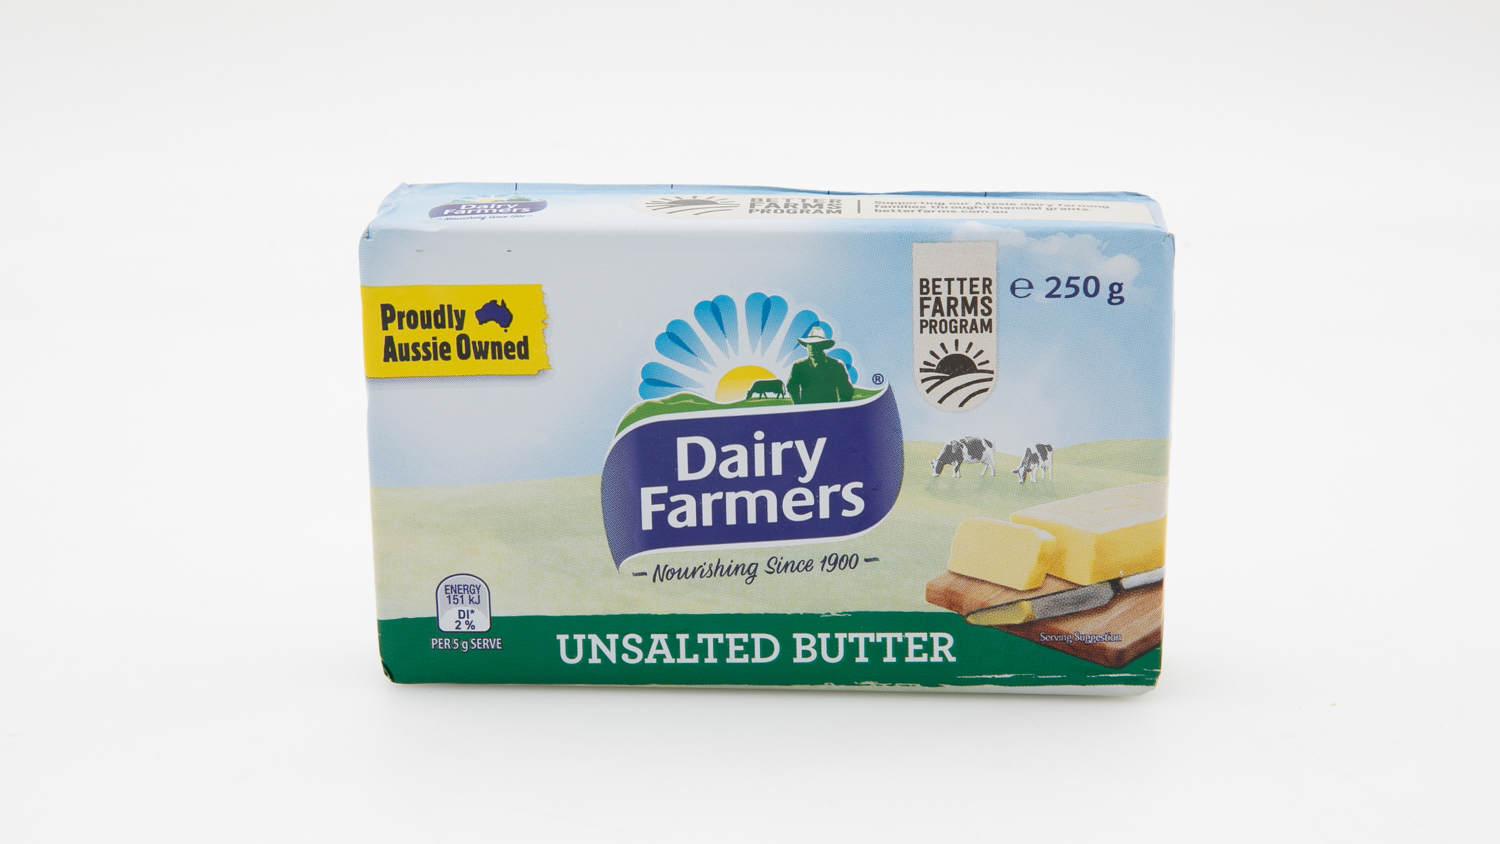 Dairy Farmers Unsalted Butter carousel image